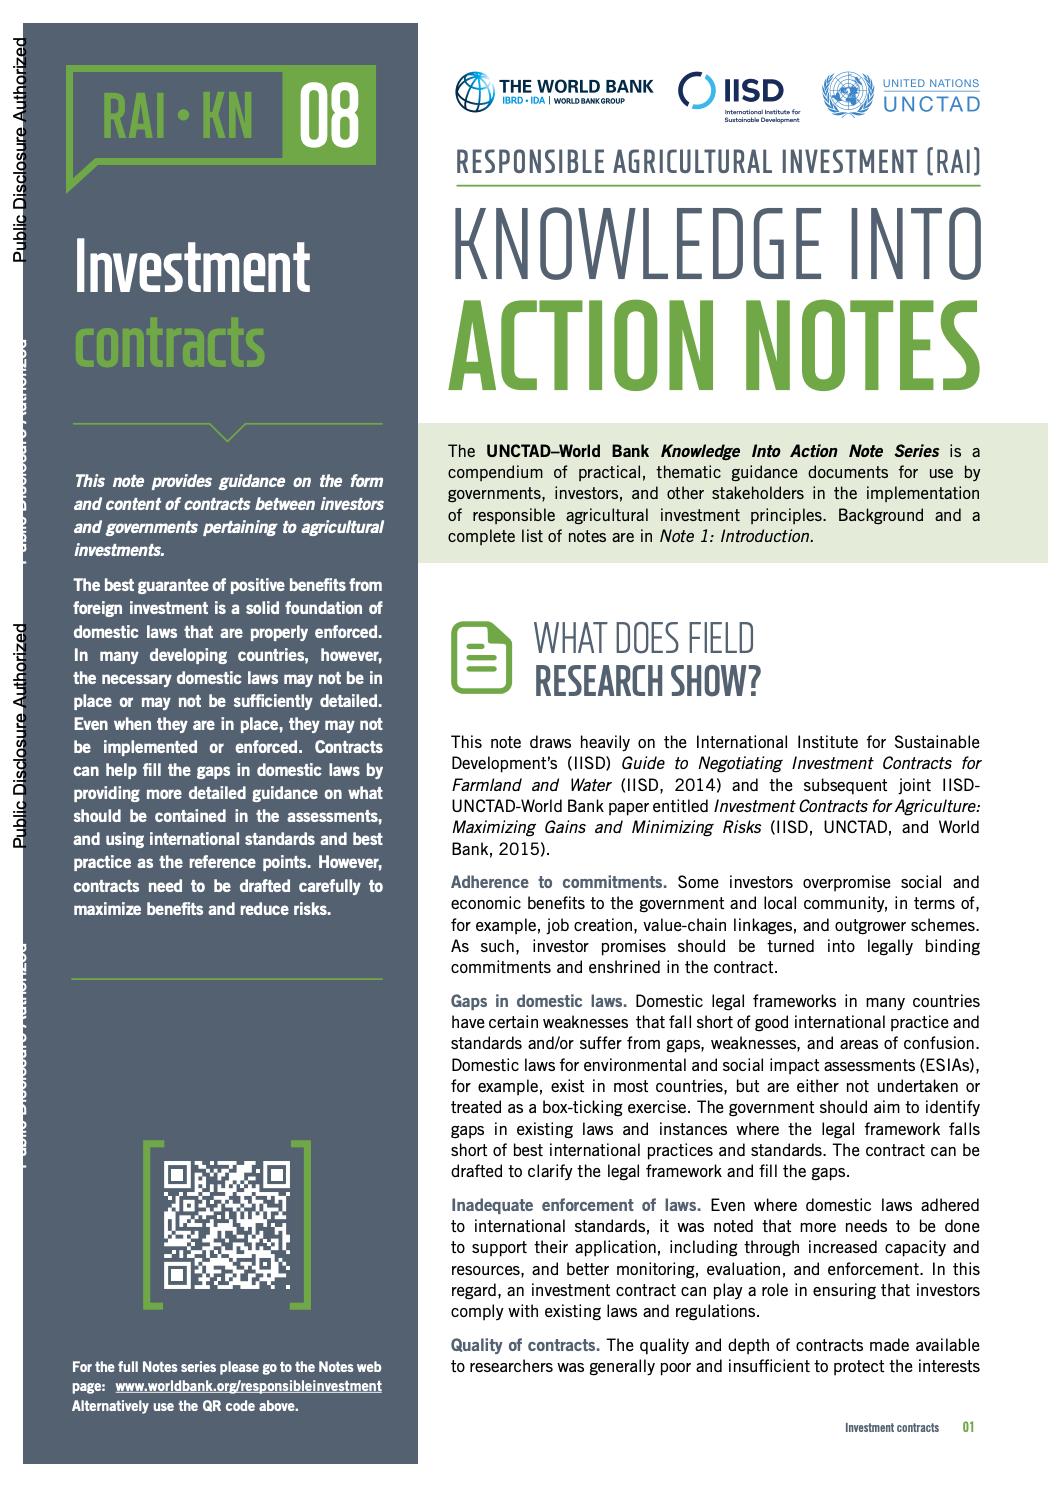 Responsible Agricultural Investment (RAI): Knowledge into Action Notes series - 8 - Investment Contracts cover image